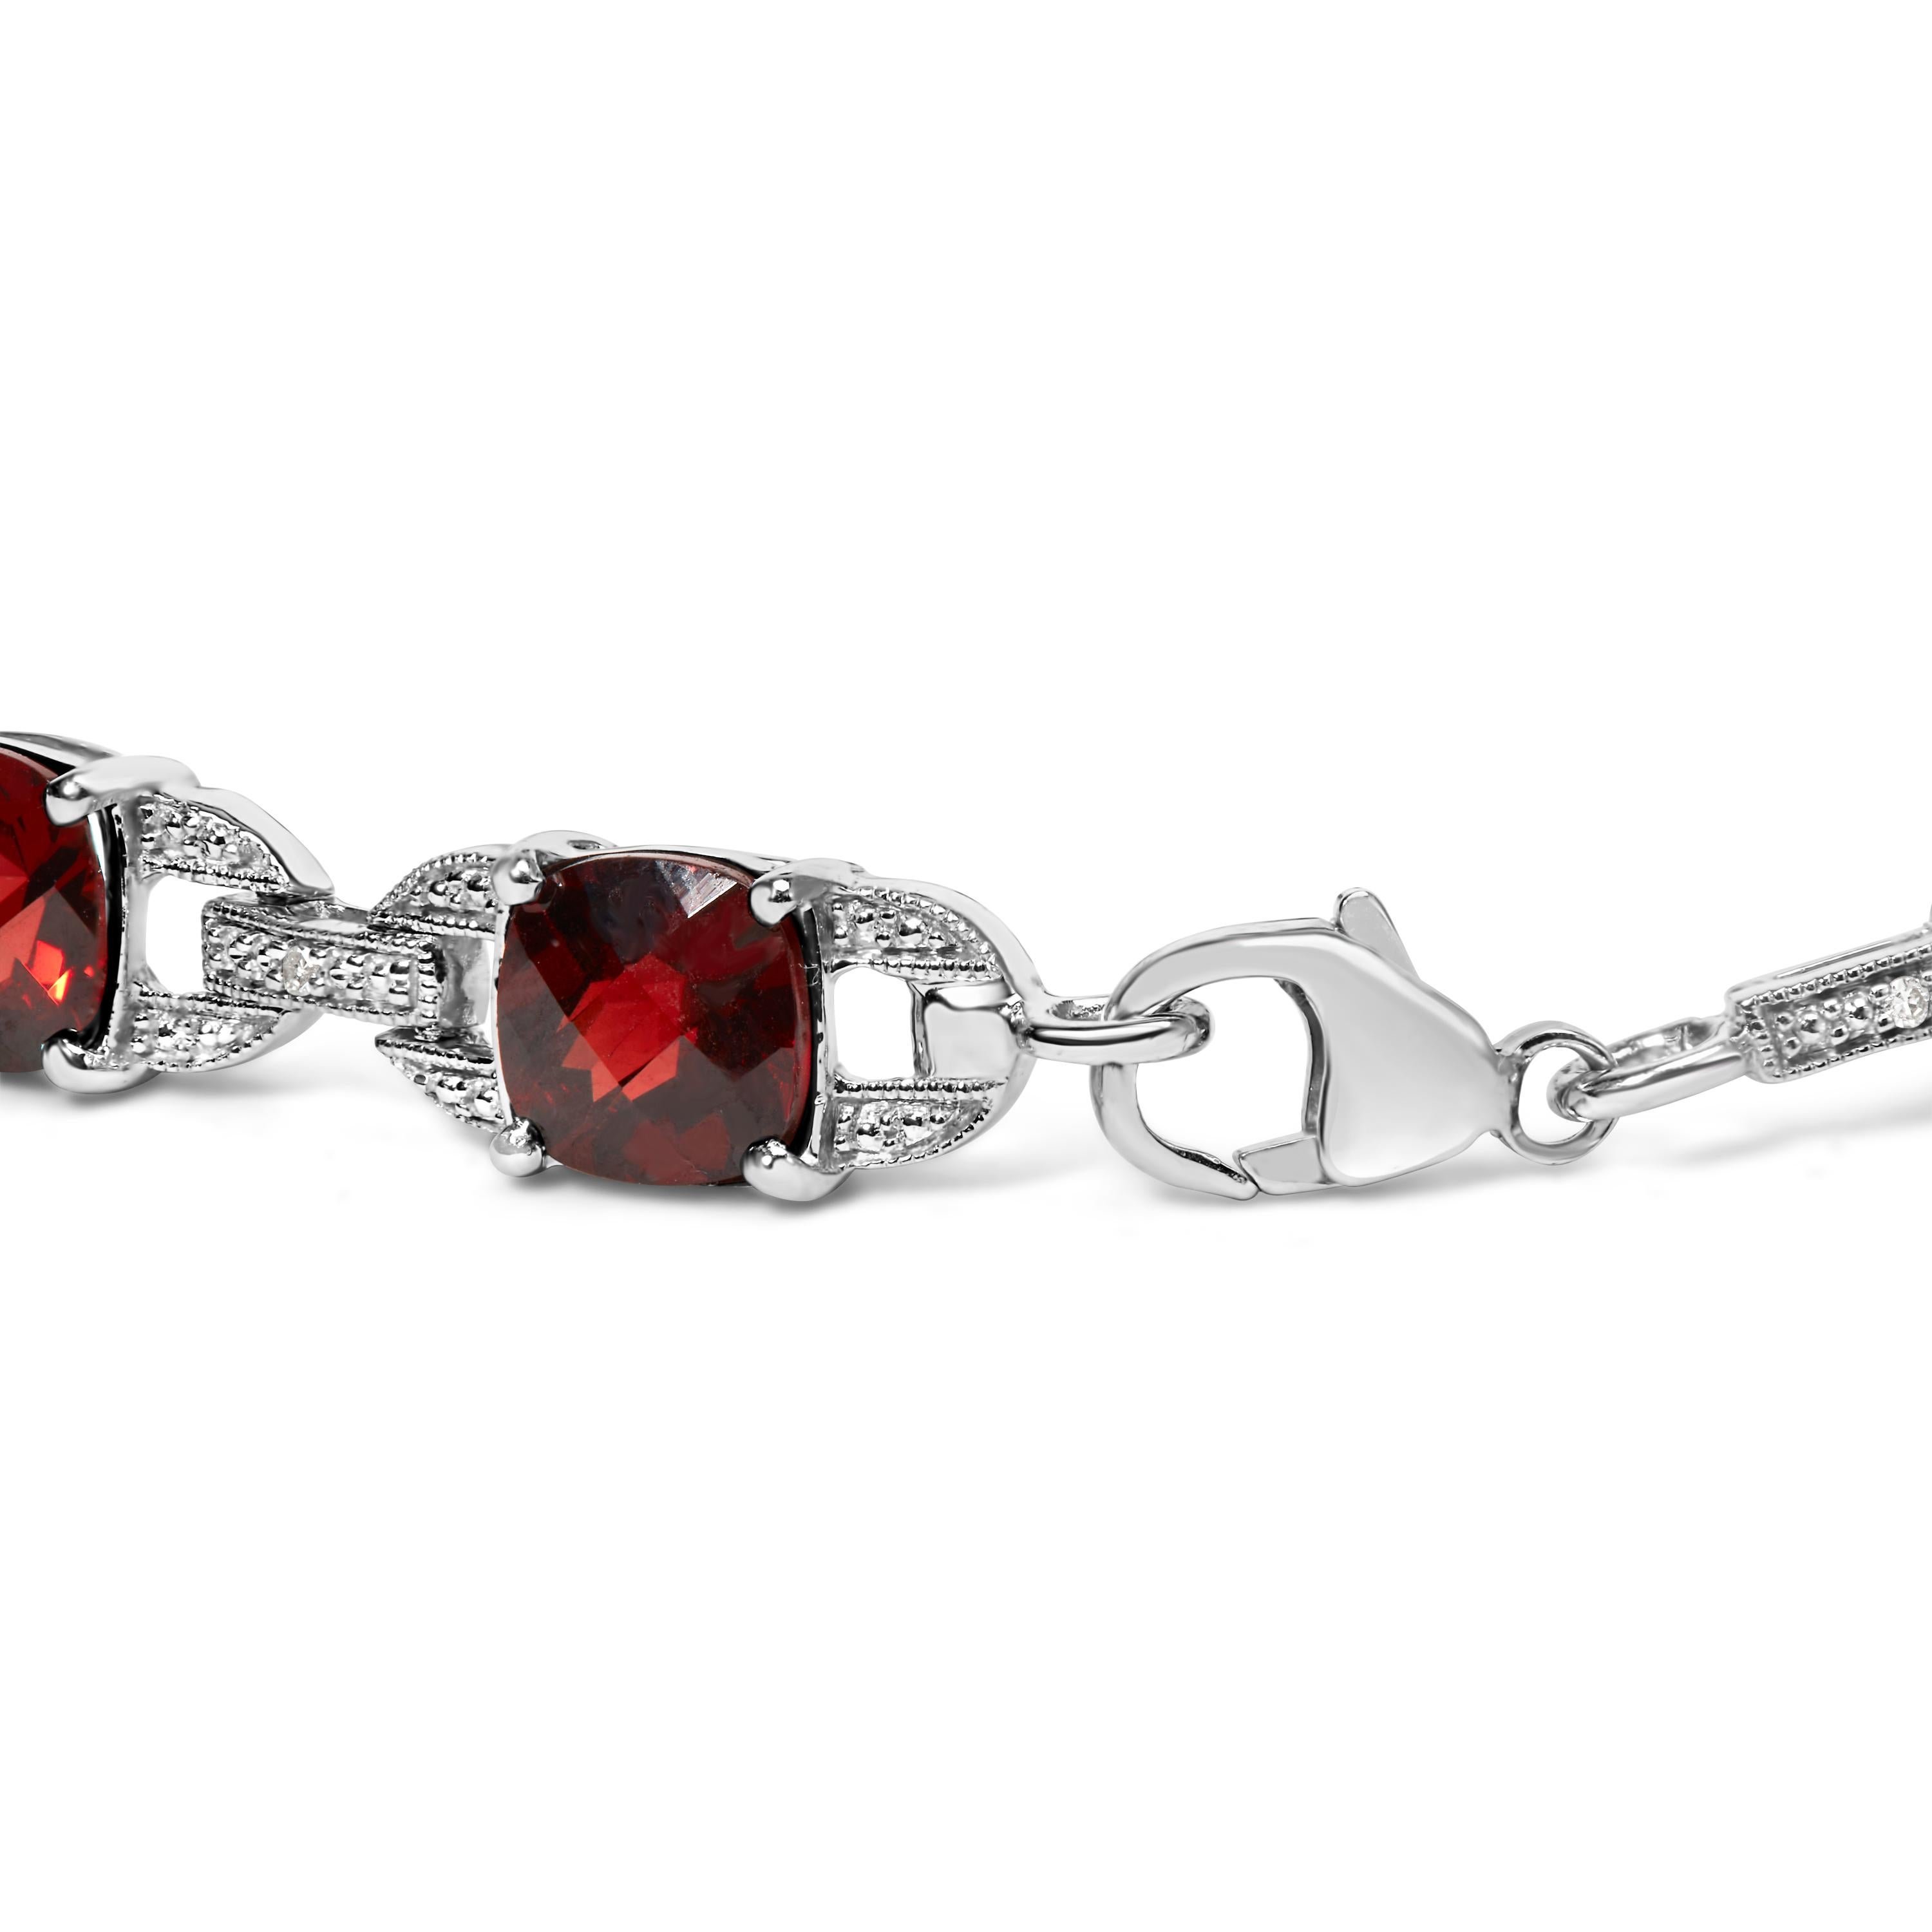 Indulge in the exquisite allure of this captivating .925 Sterling Silver Checkered Cushion Red Garnet and Diamond Accent Fashion Tennis Link Bracelet. Crafted with meticulous artistry, this stunning bracelet features a dazzling array of 10 natural